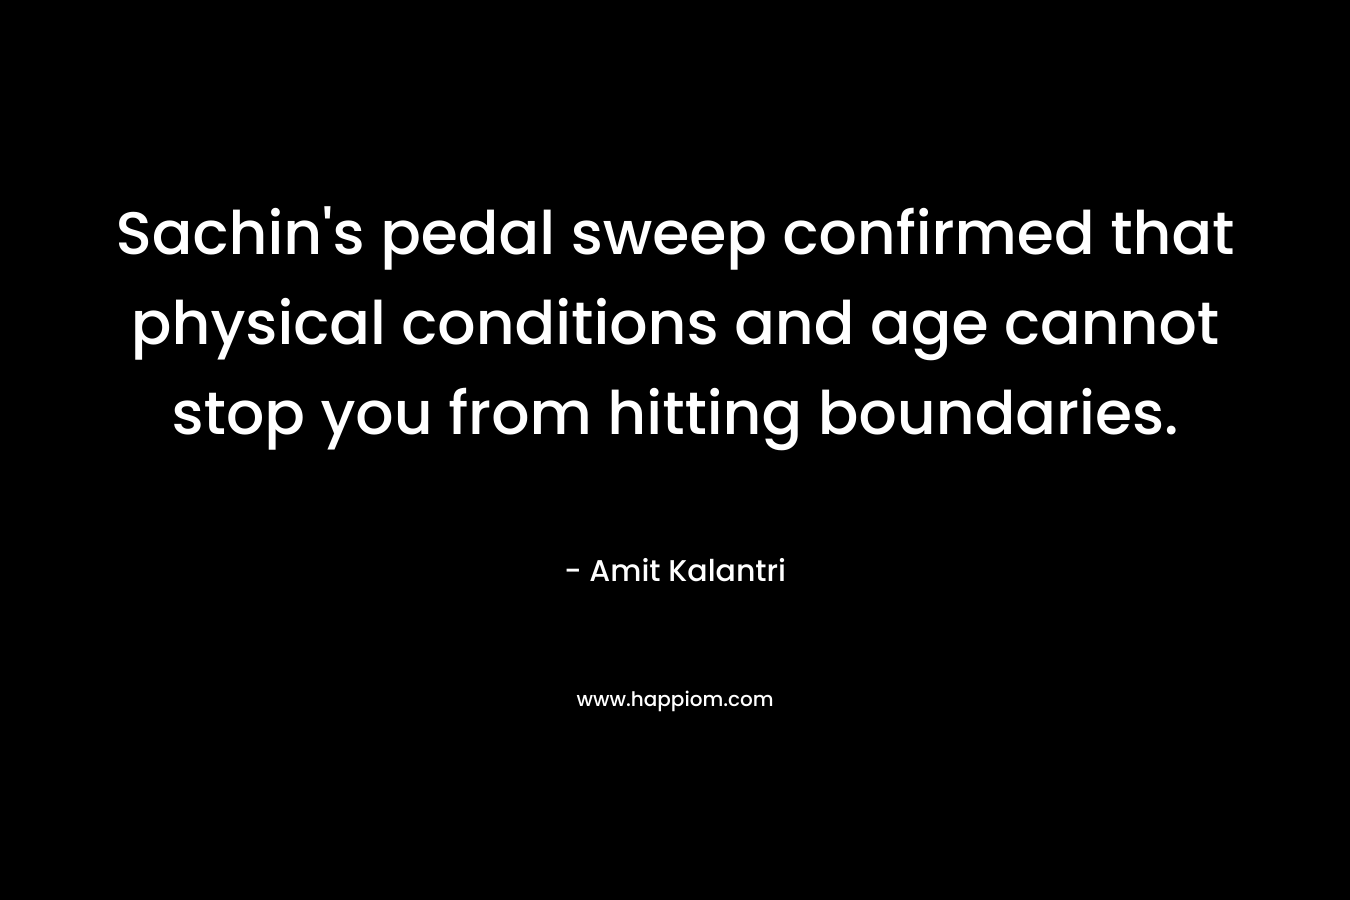 Sachin's pedal sweep confirmed that physical conditions and age cannot stop you from hitting boundaries.